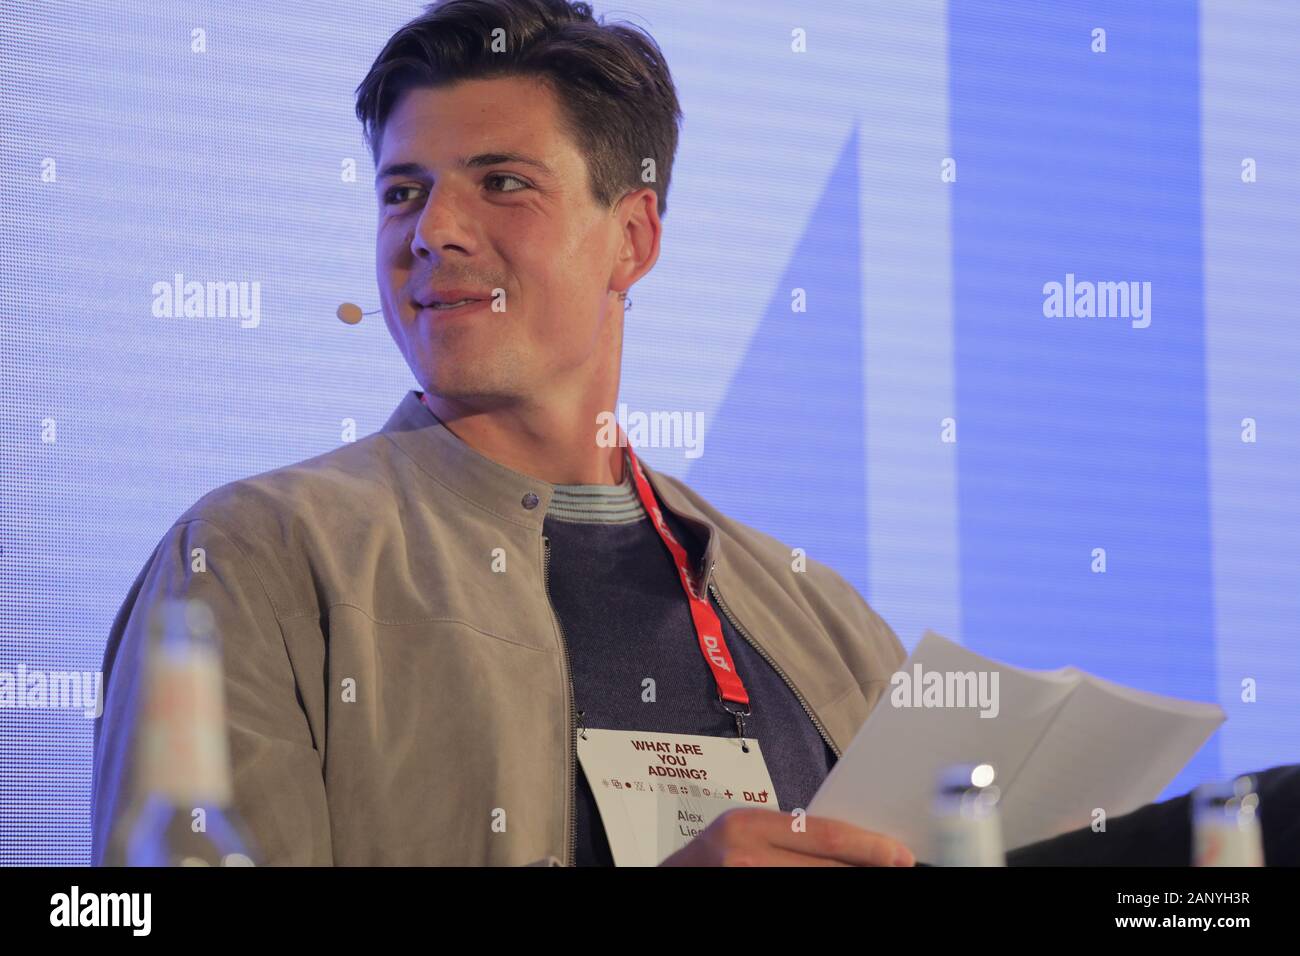 Munich, Bavaria. 19th Jan, 2020. Alexander Liegl (Co-Founder and CEO Layer1) speaks during a panel at DLD Munich Conference 2020, Europe's big innovation conference, Alte Kongresshalle, Munich, January 18-20, 2020 Picture Alliance for DLD/Hubert Burda Media | usage worldwide Credit: dpa/Alamy Live News Stock Photo